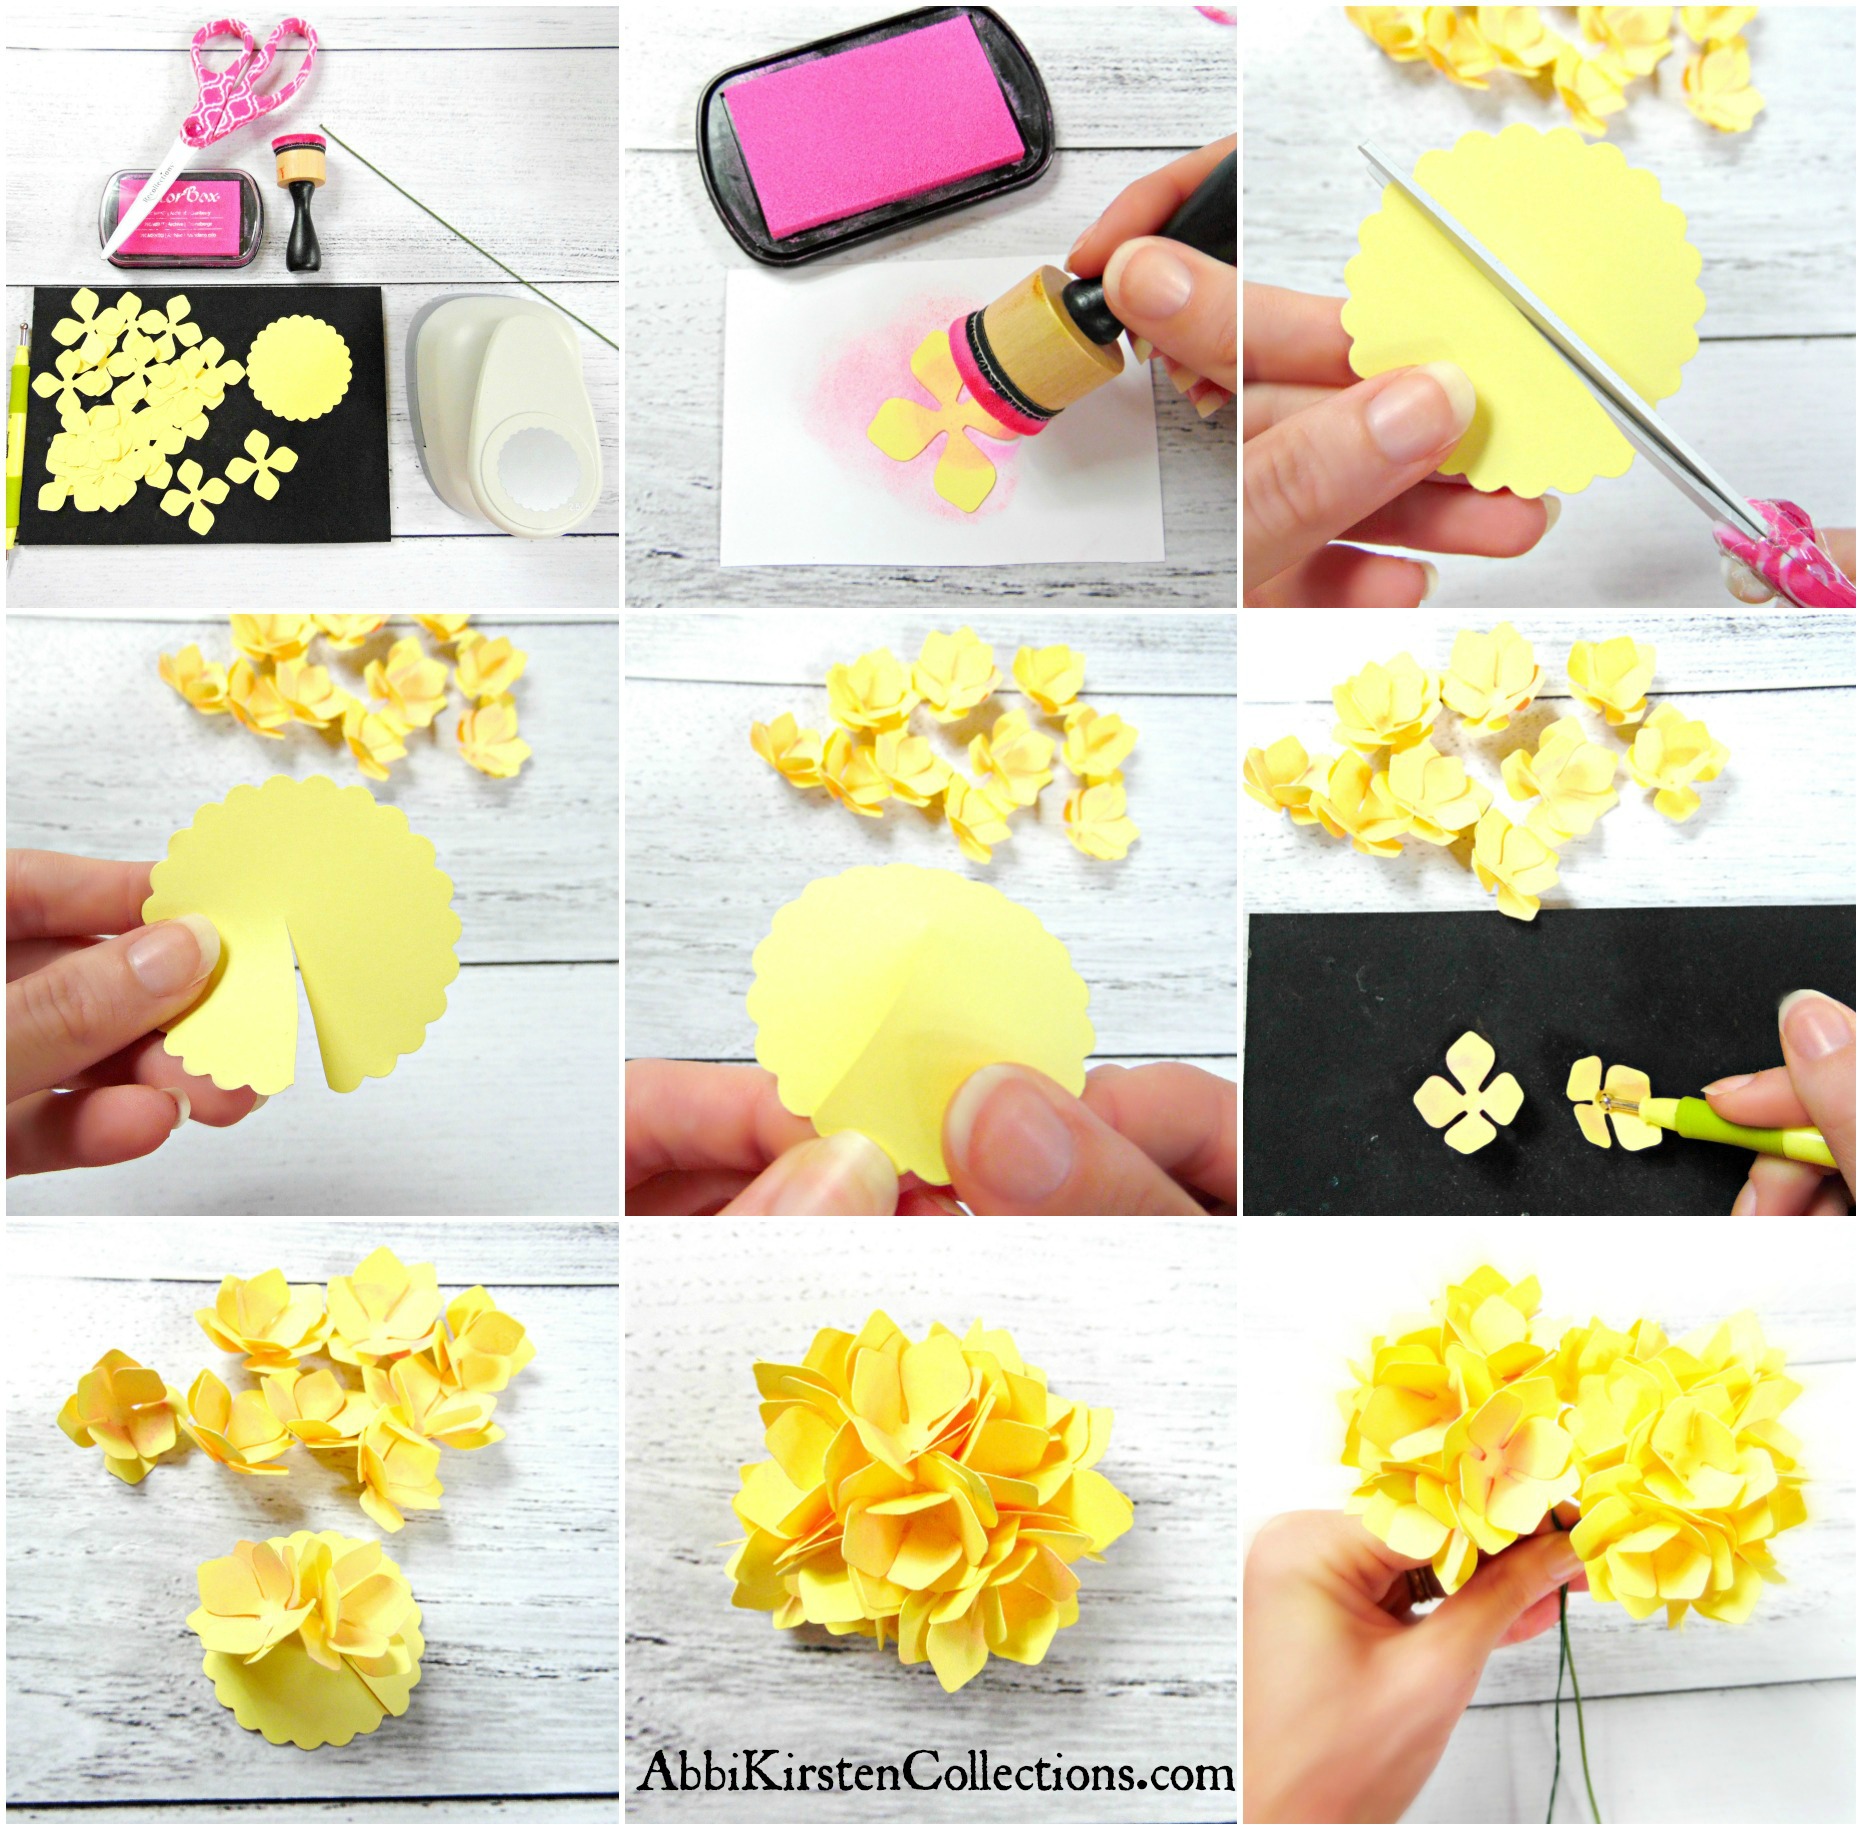 A nine-picture grid showing the steps needed to make a hydrangea summer paper flower craft. Abbi Kirsten's hand cuts and shapes yellow paper into petals and glues them together to make a single-stemmed hydrangea. 